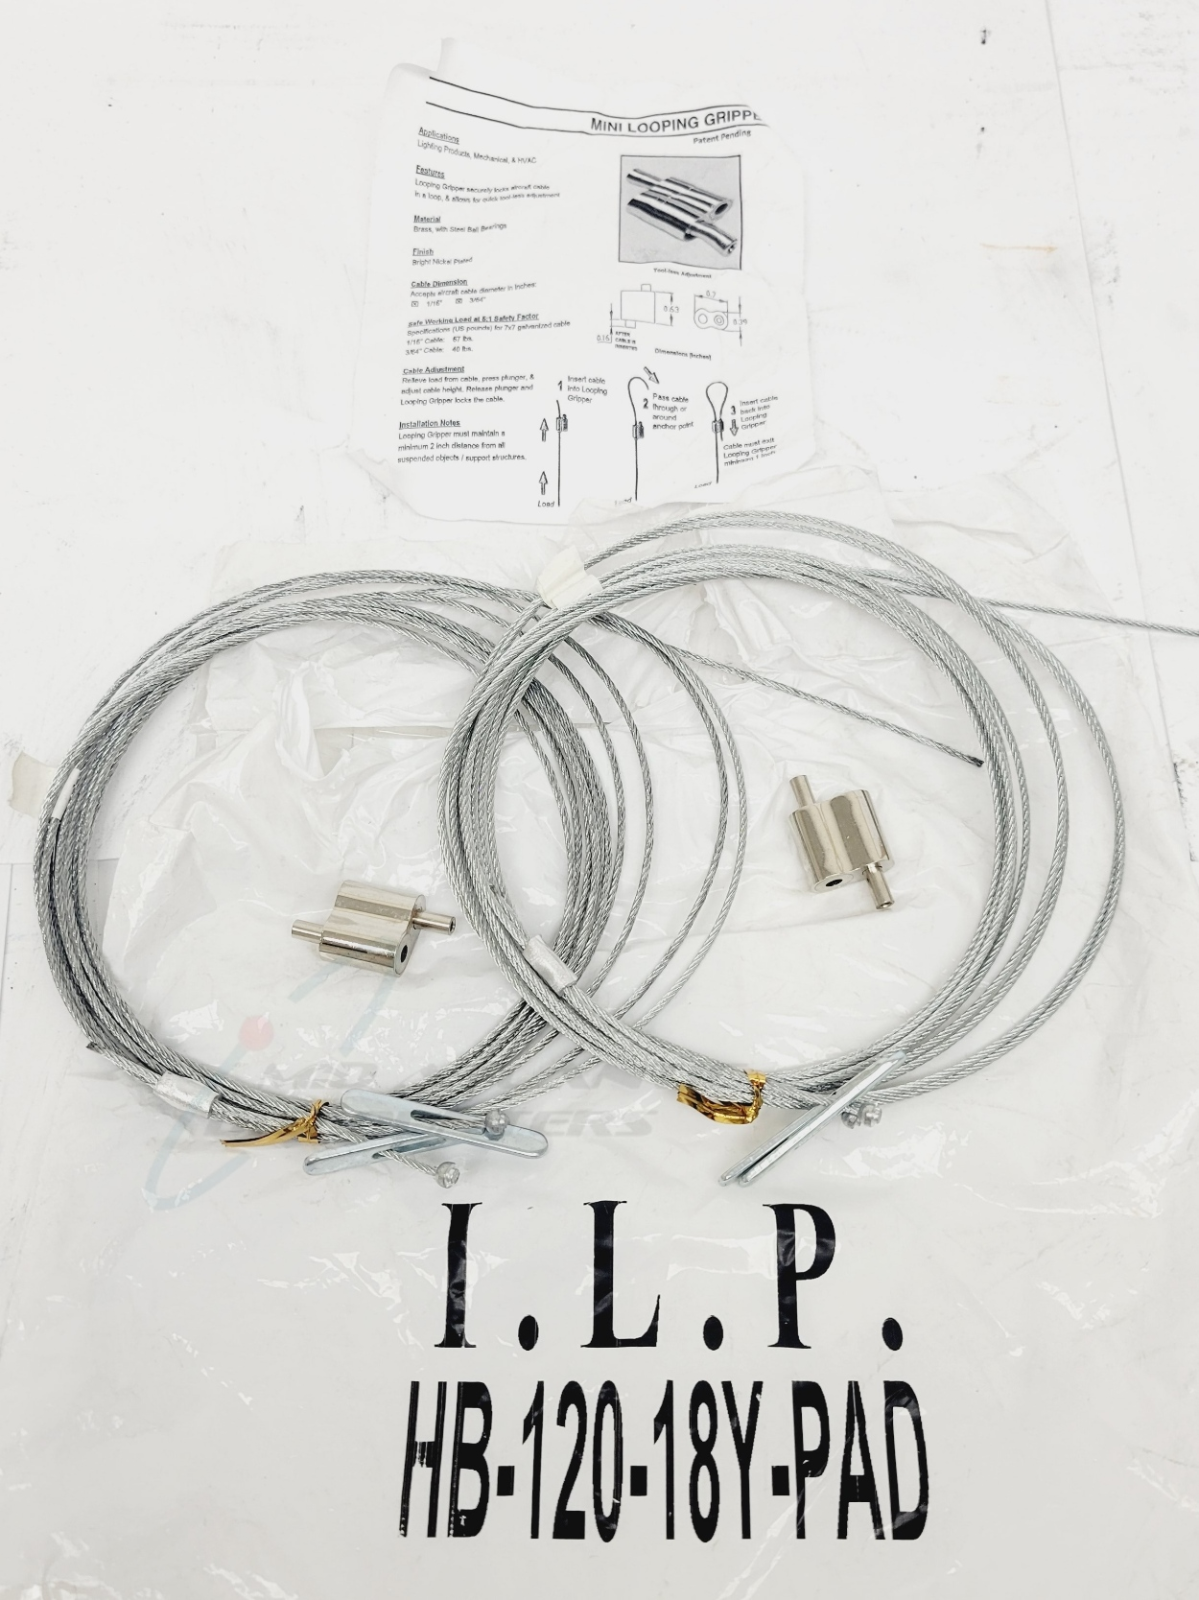 10FT TOGGLE CABLE KIT W/NL